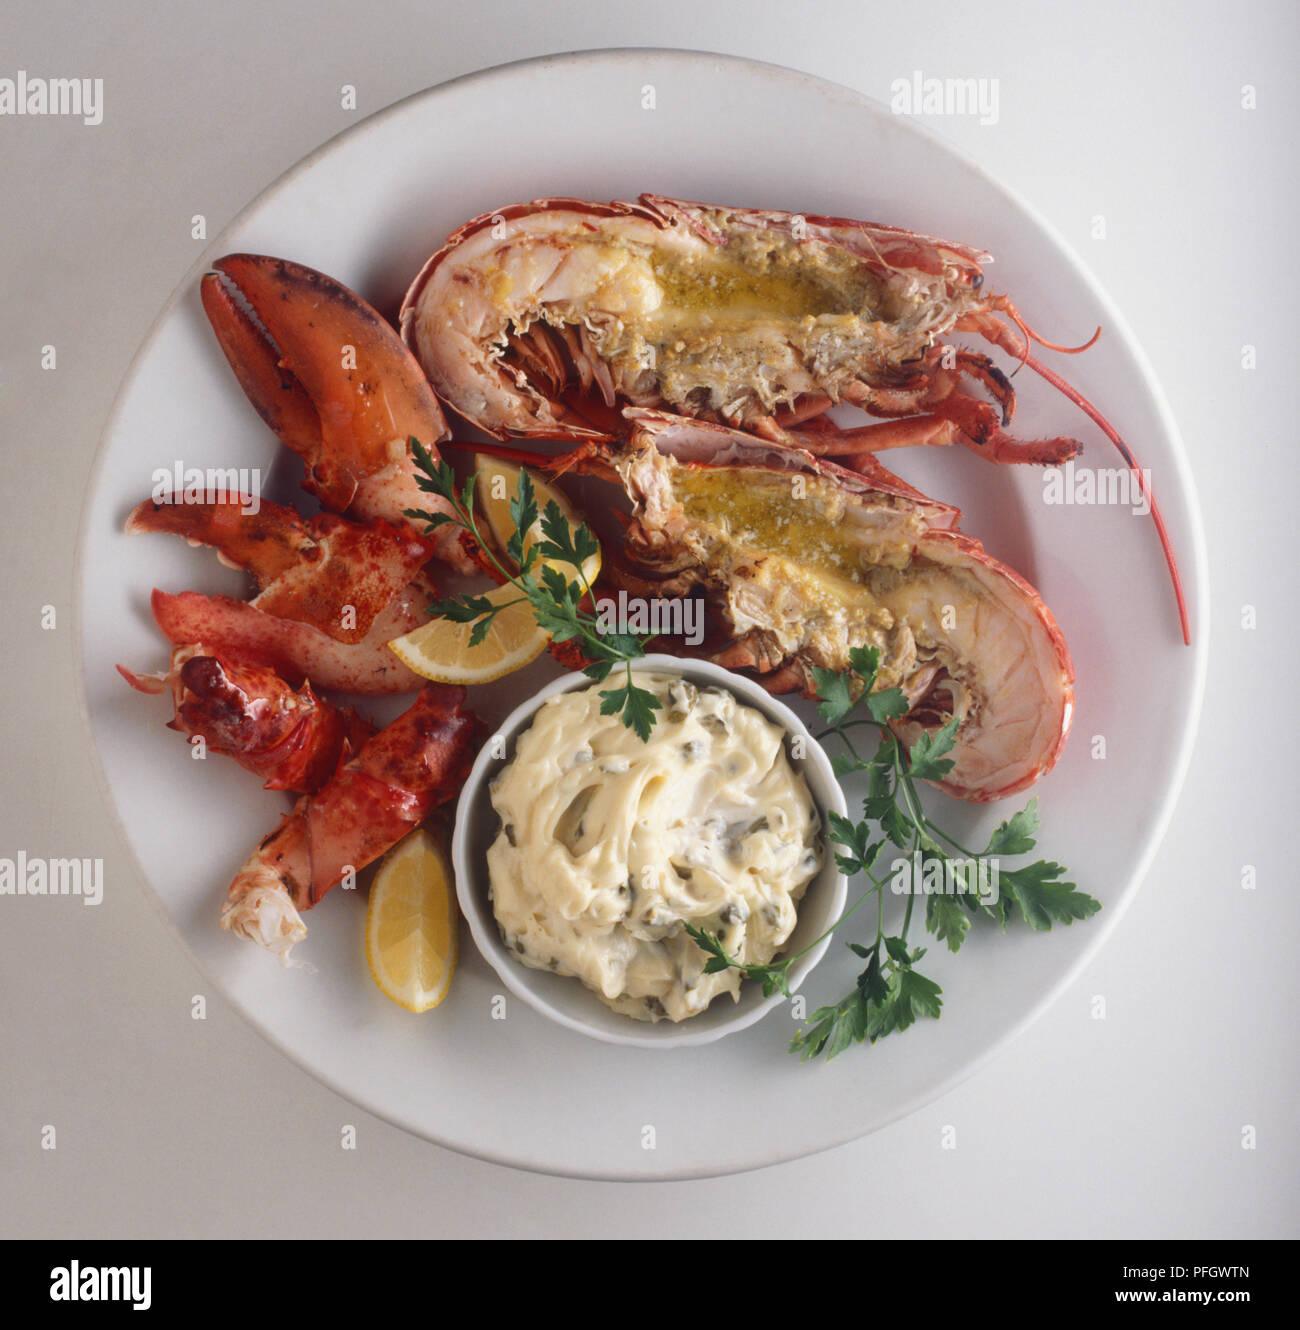 Langosta a la parrilla, lobsters served with bowl of mayonnaise, lemon slices and herbs, view from above Stock Photo